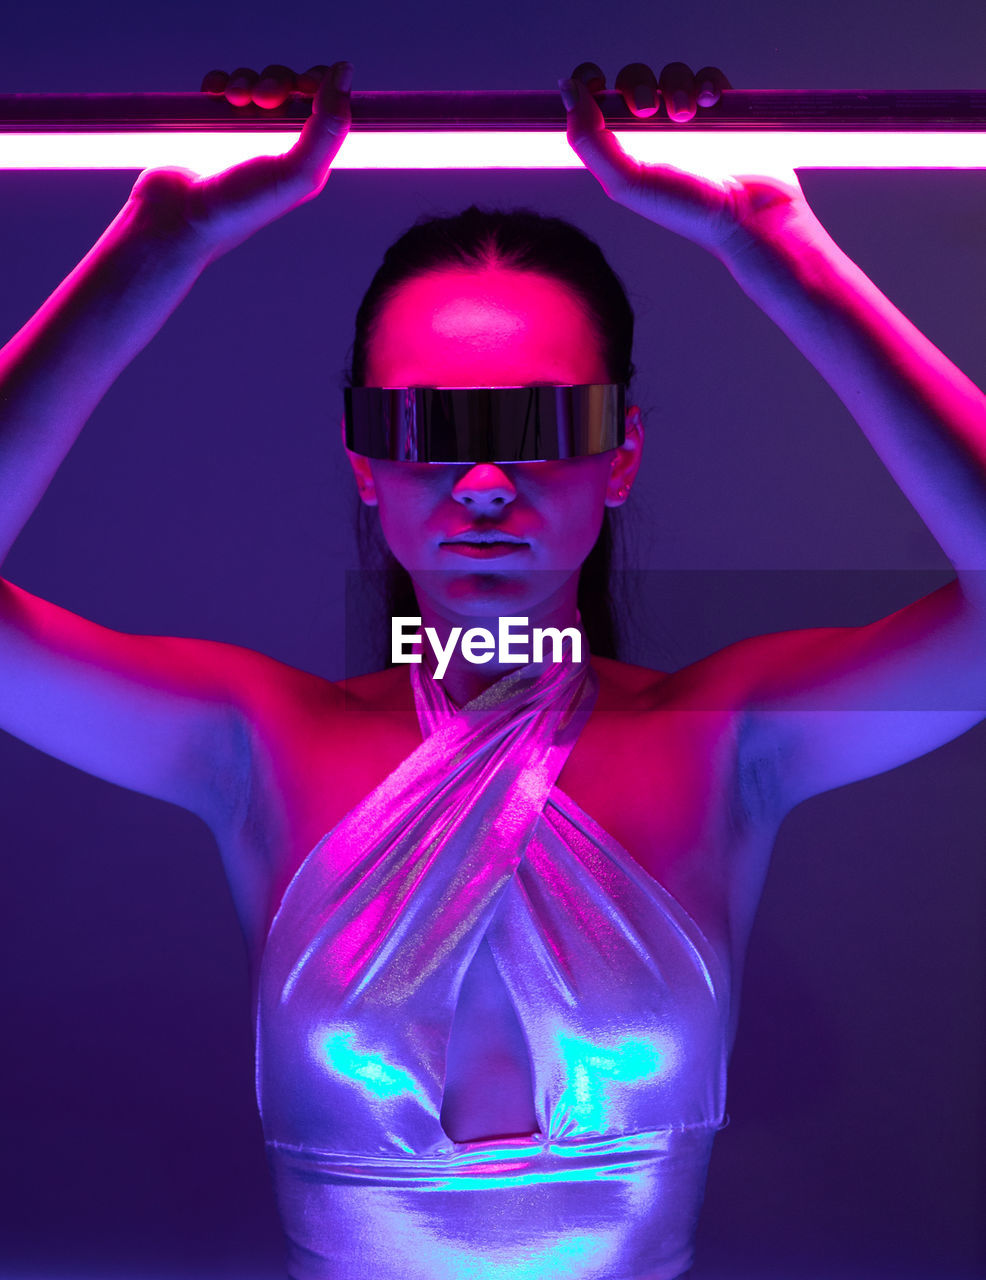 Self assured young female model with long hair in futuristic outfit and vr goggles standing in dark room with neon sword in hands